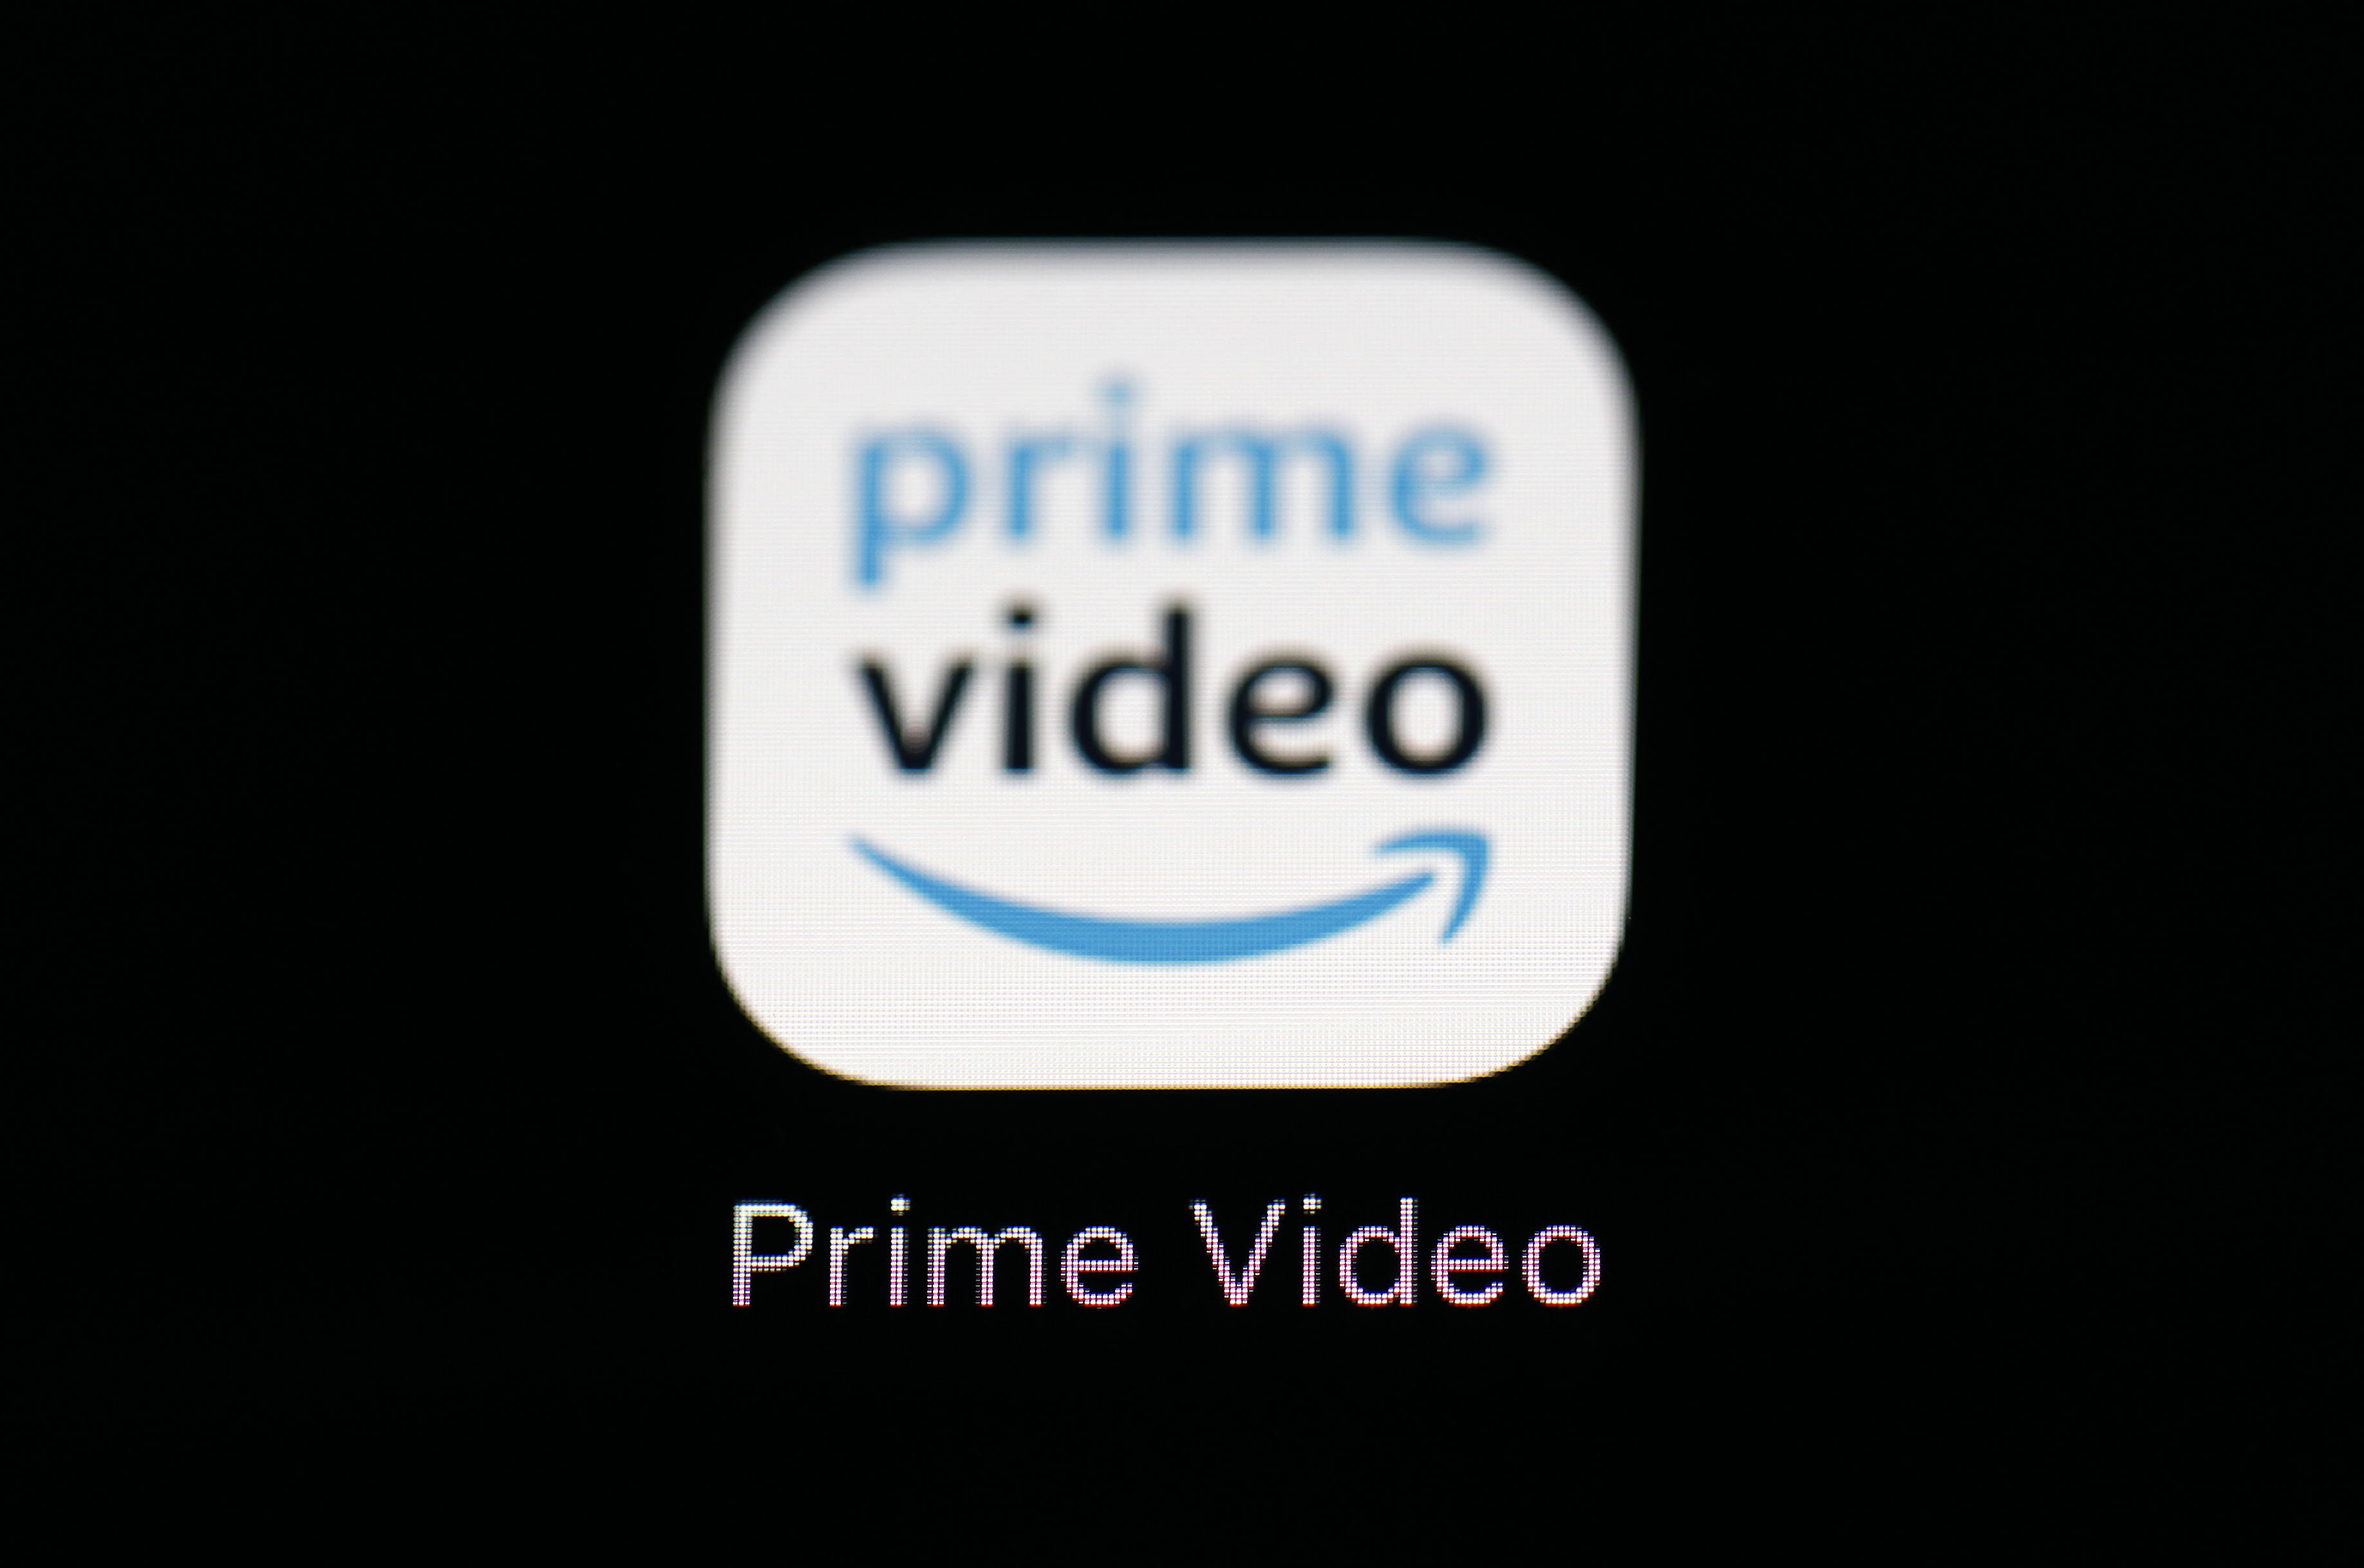 Amazon will put ads on Prime Video next year